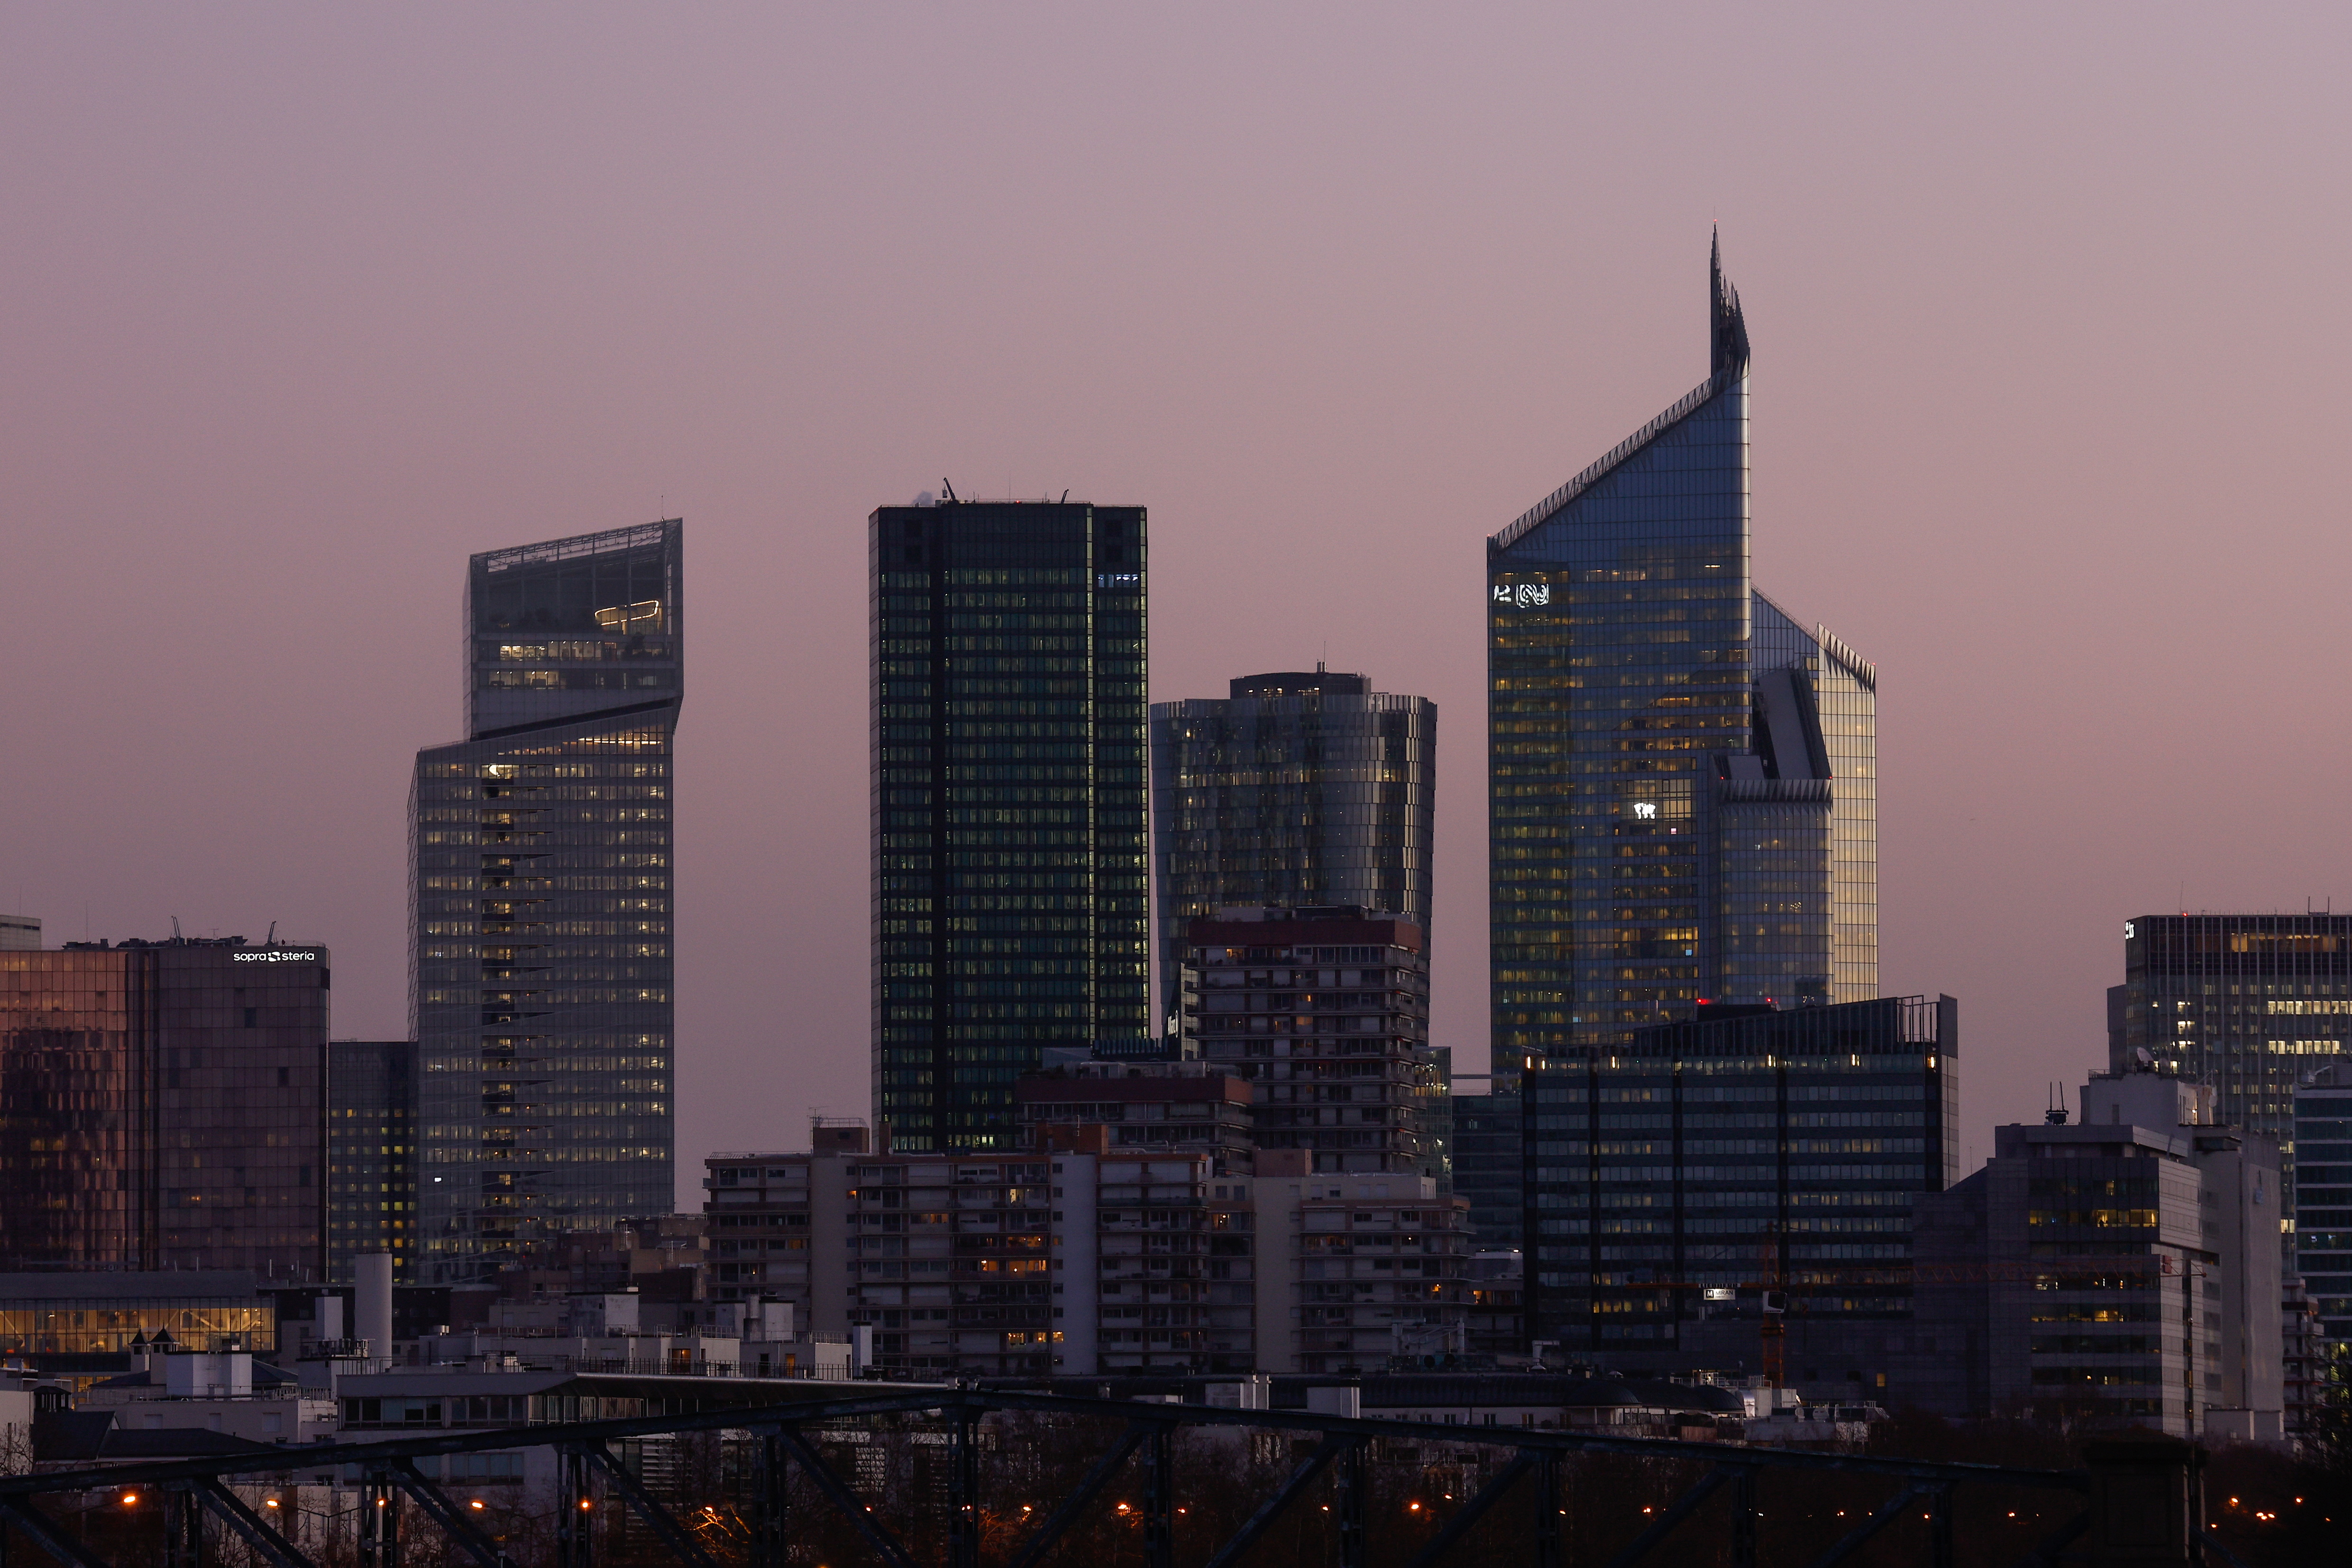 The financial and business district of La Defense near Paris